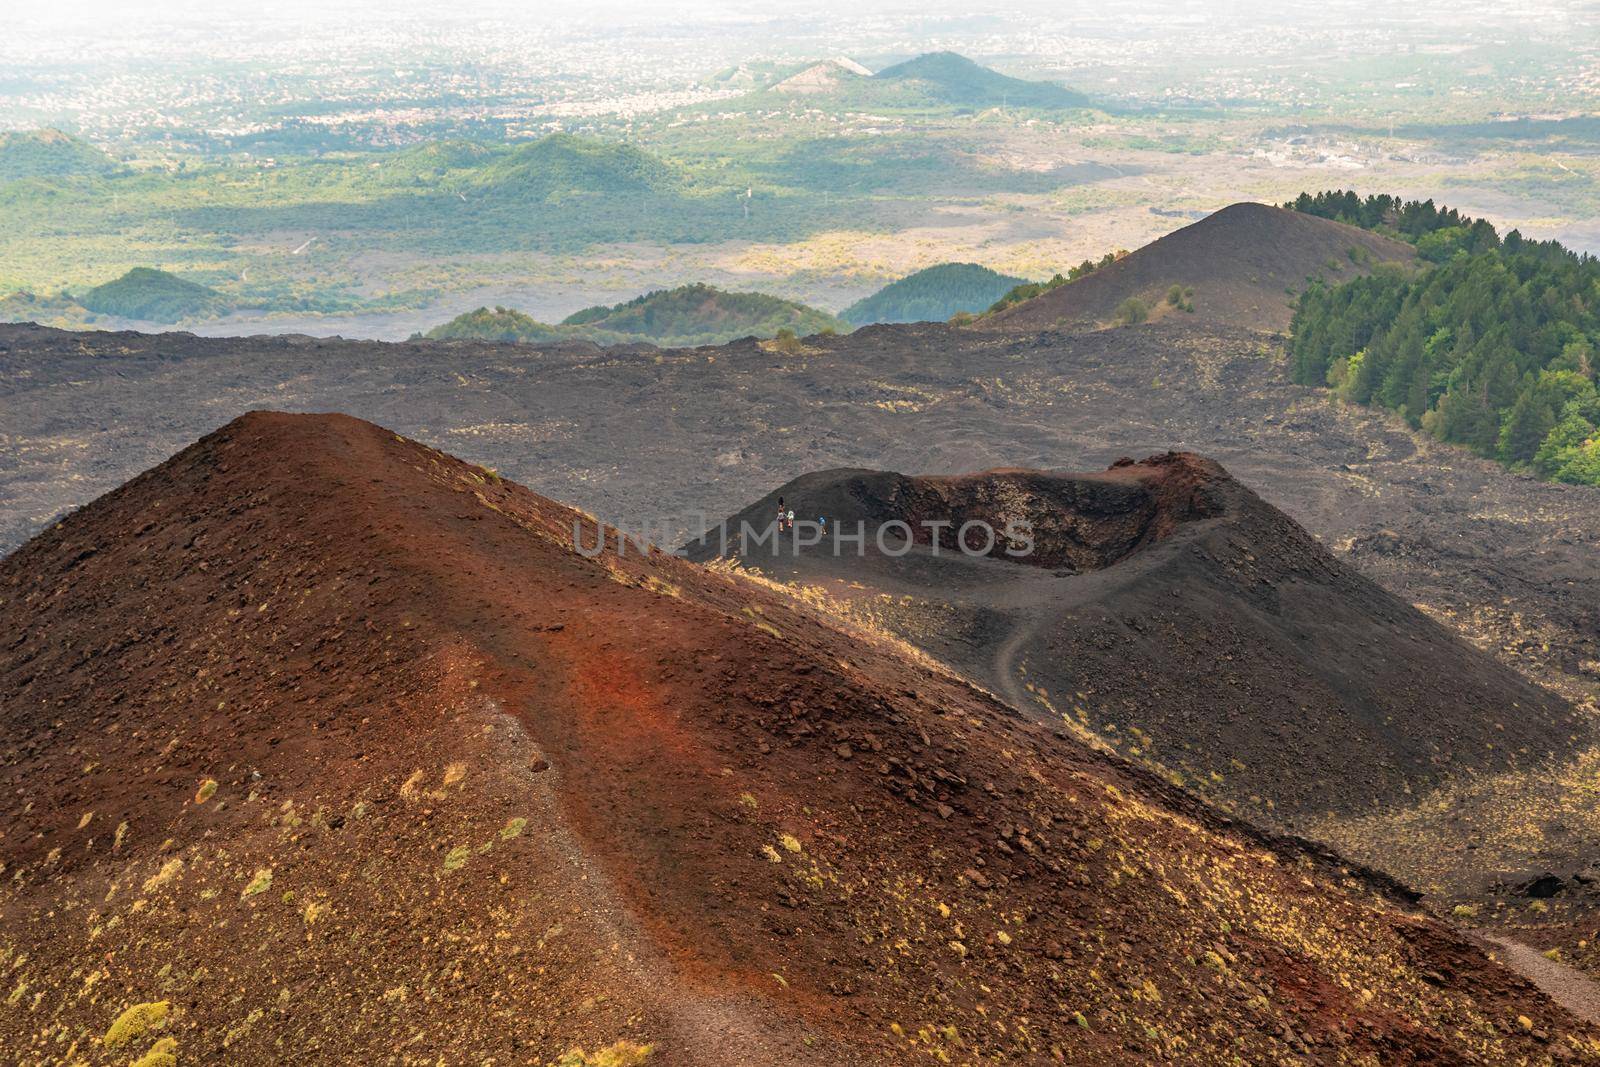 View of Etna volcano craters among the clouds near Rifugio Sapienza. Sicily, Italy